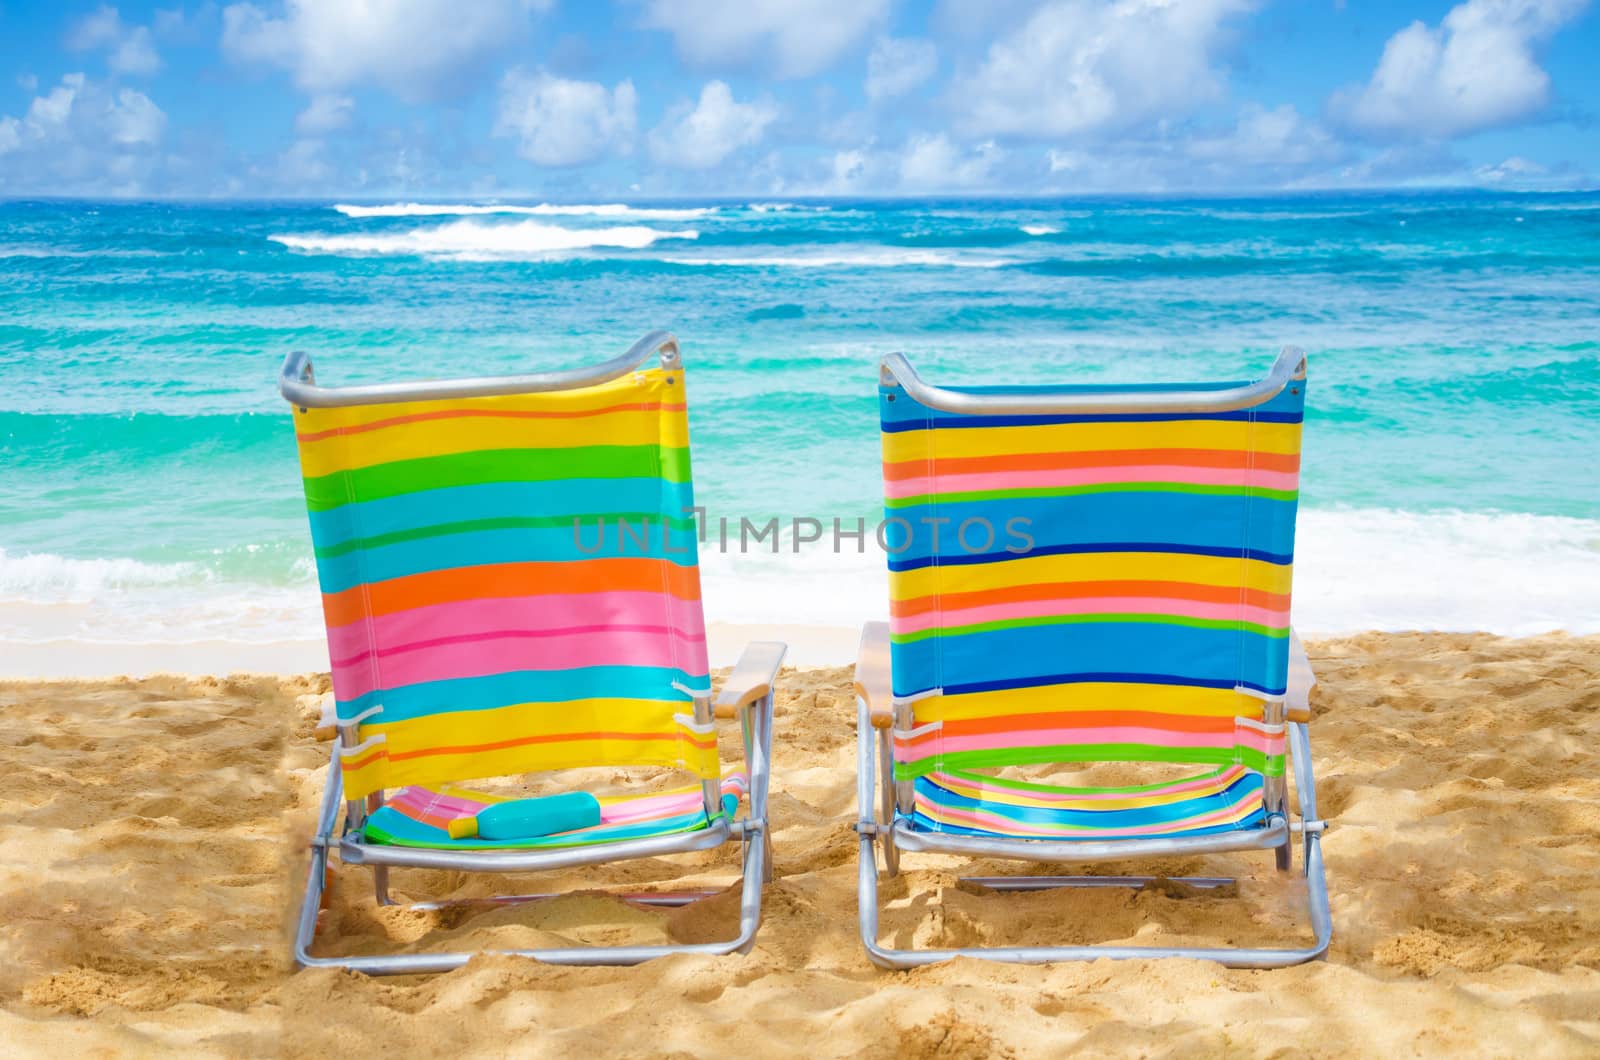 Two colorful beach chairs under by the ocean with sunscreen.